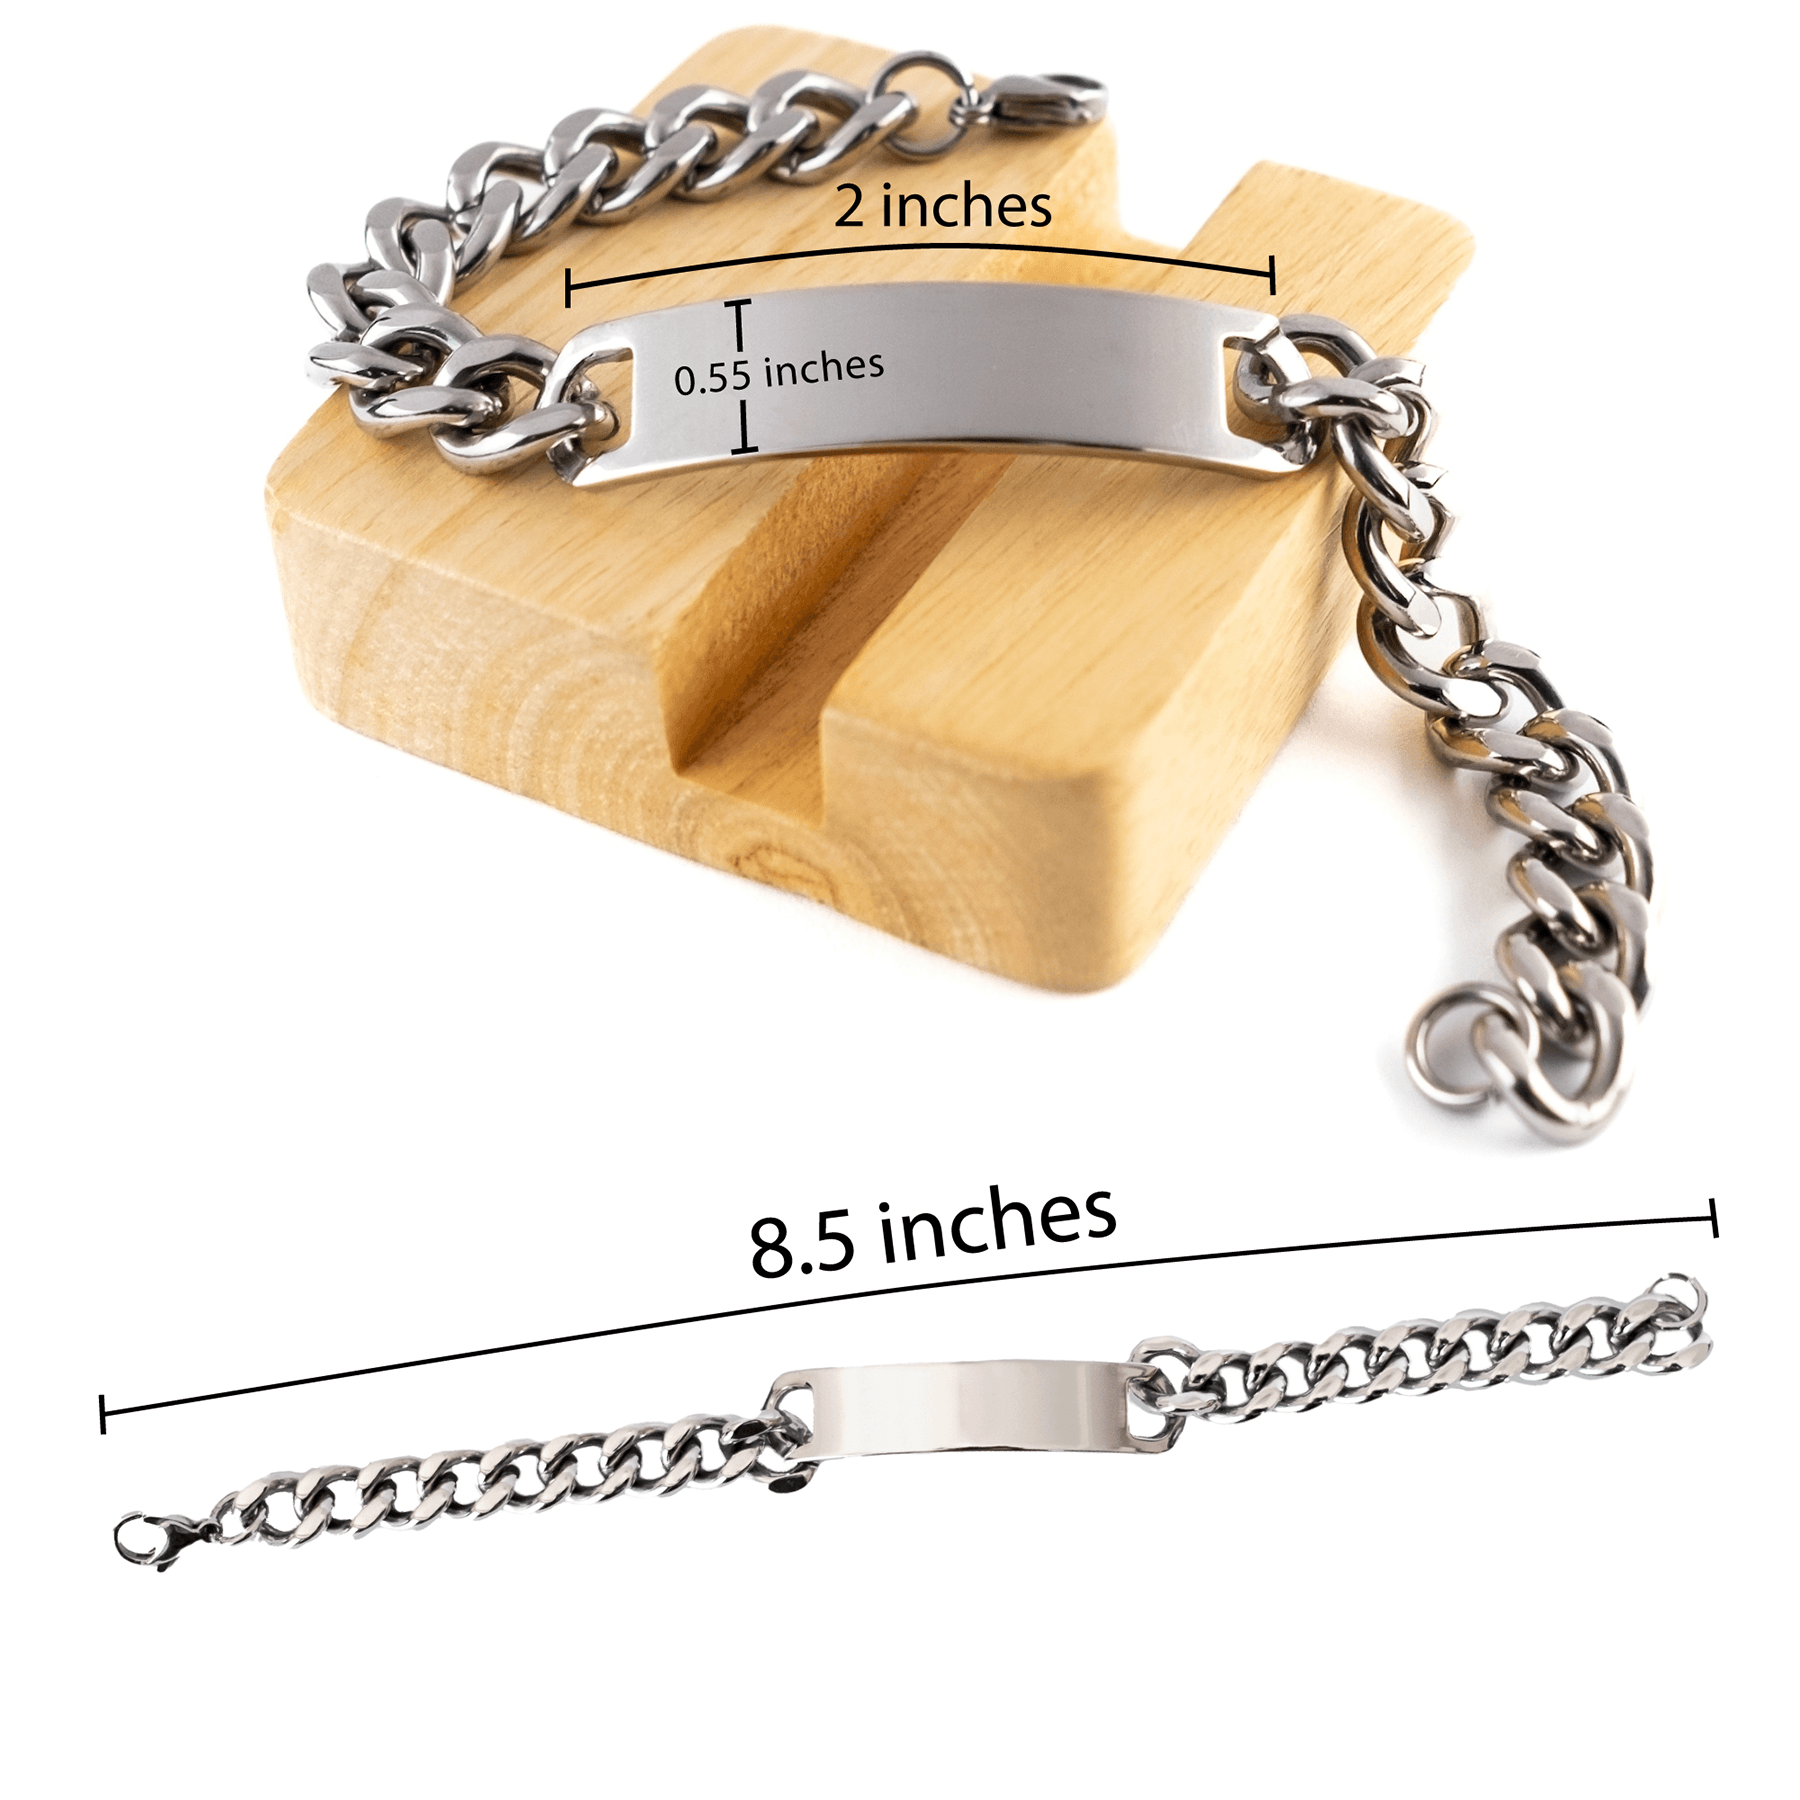 Fabricator Cuban Chain Link Engraved Bracelet - Thanks for being who you are - Birthday Christmas Jewelry Gifts Coworkers Colleague Boss - Mallard Moon Gift Shop